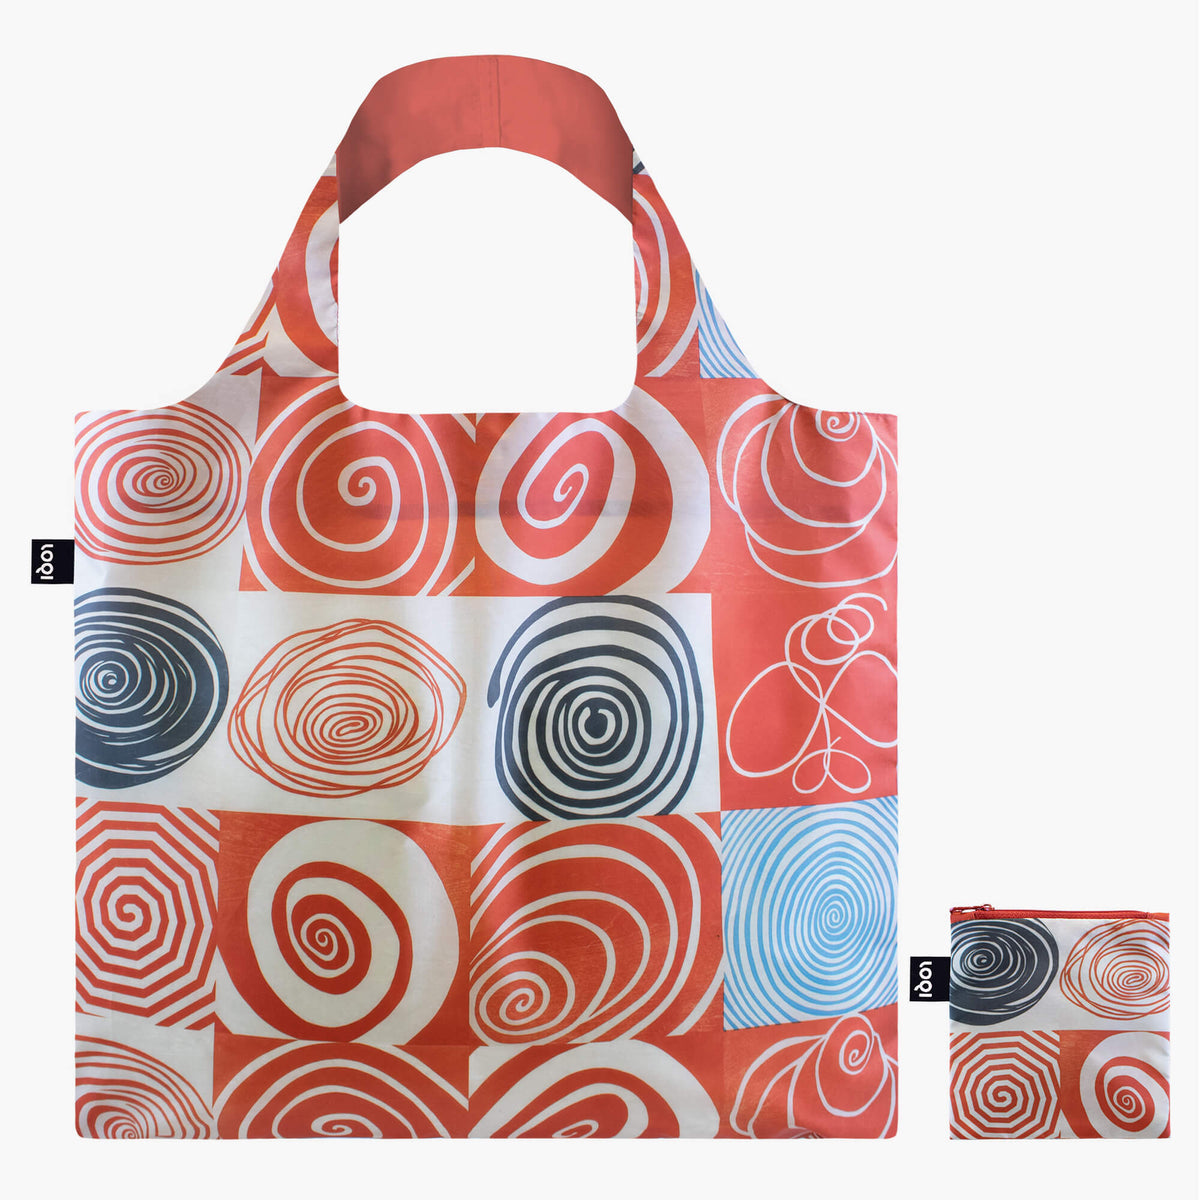 LOQI Reusable Tote Bag – Louise Bourgeois Spiral Grids